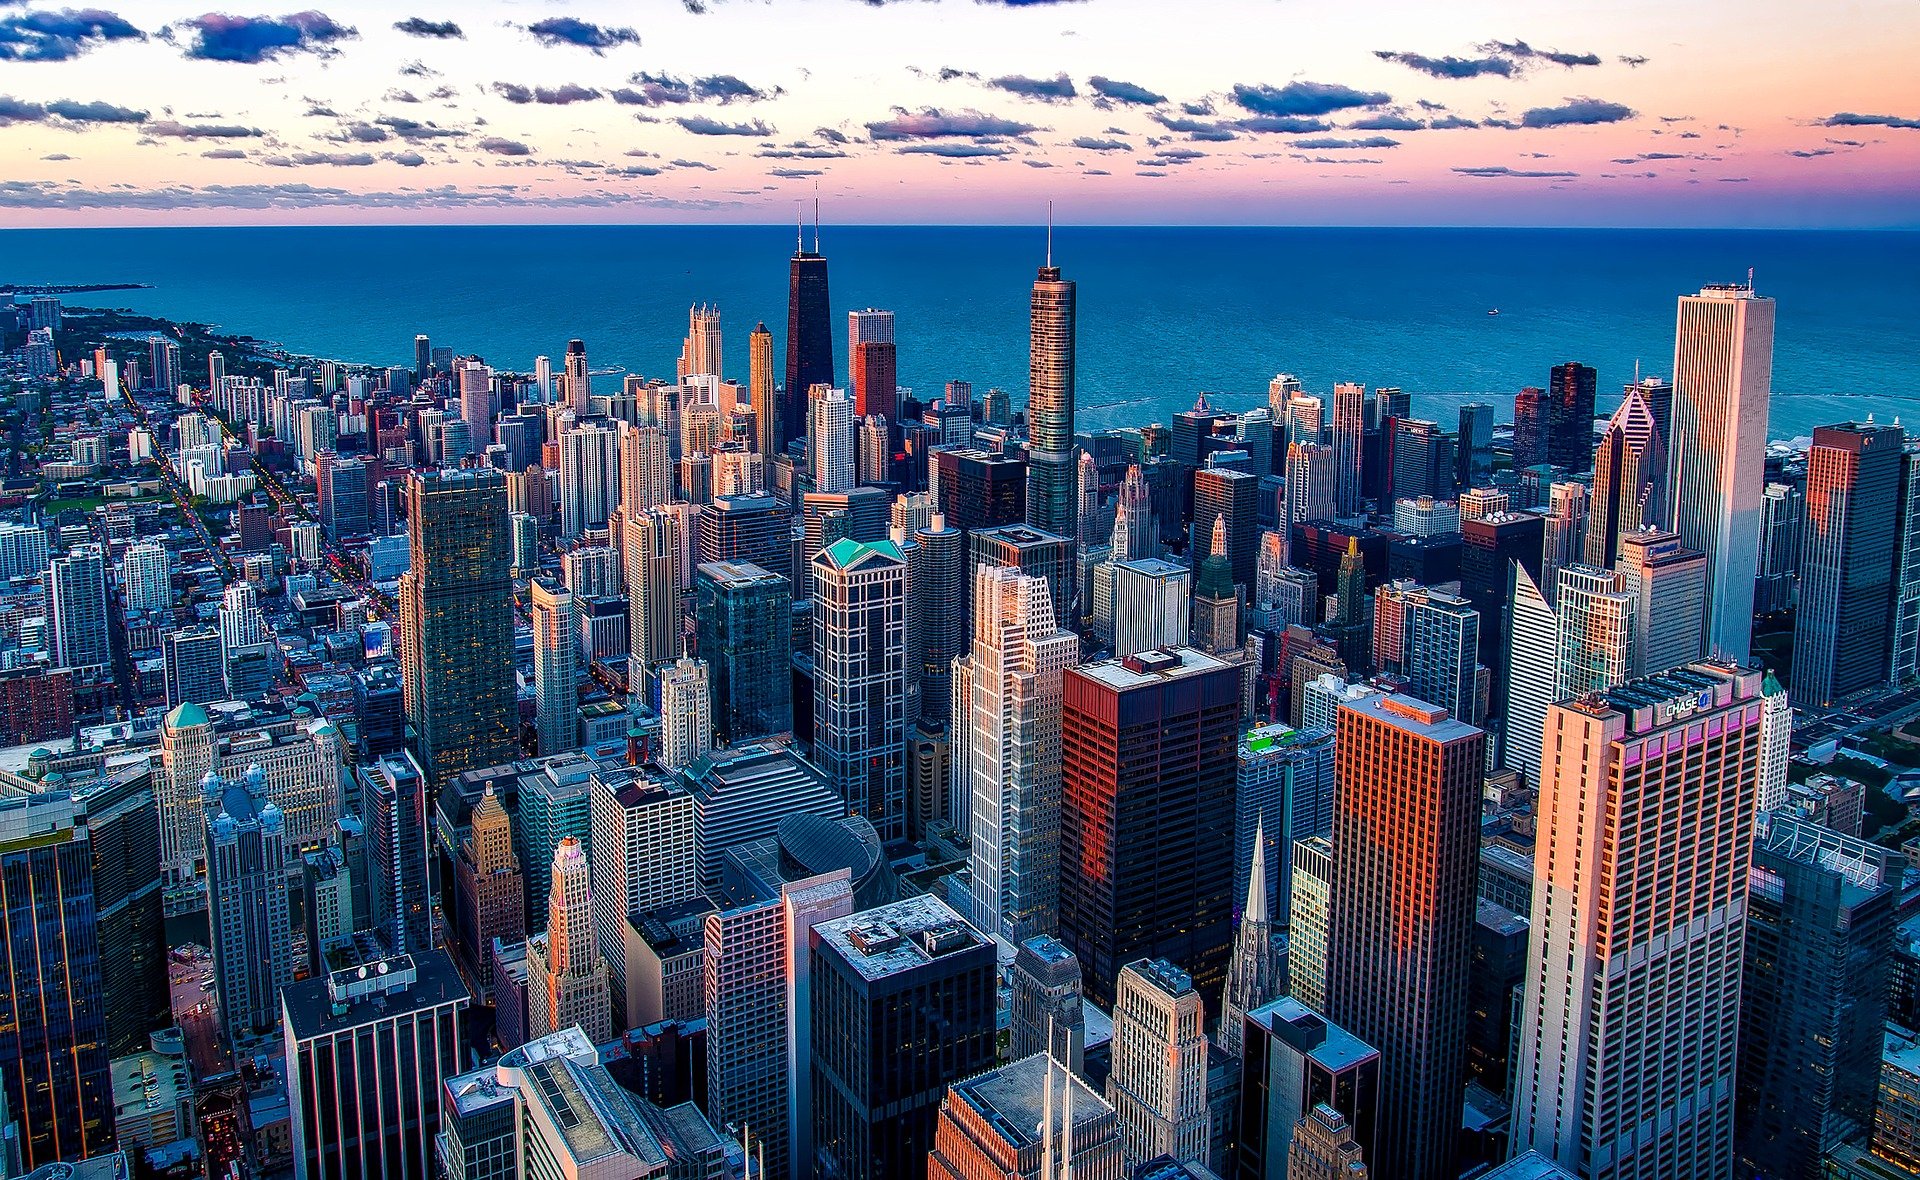 2019 Chicago Building Code: What You Need to Know